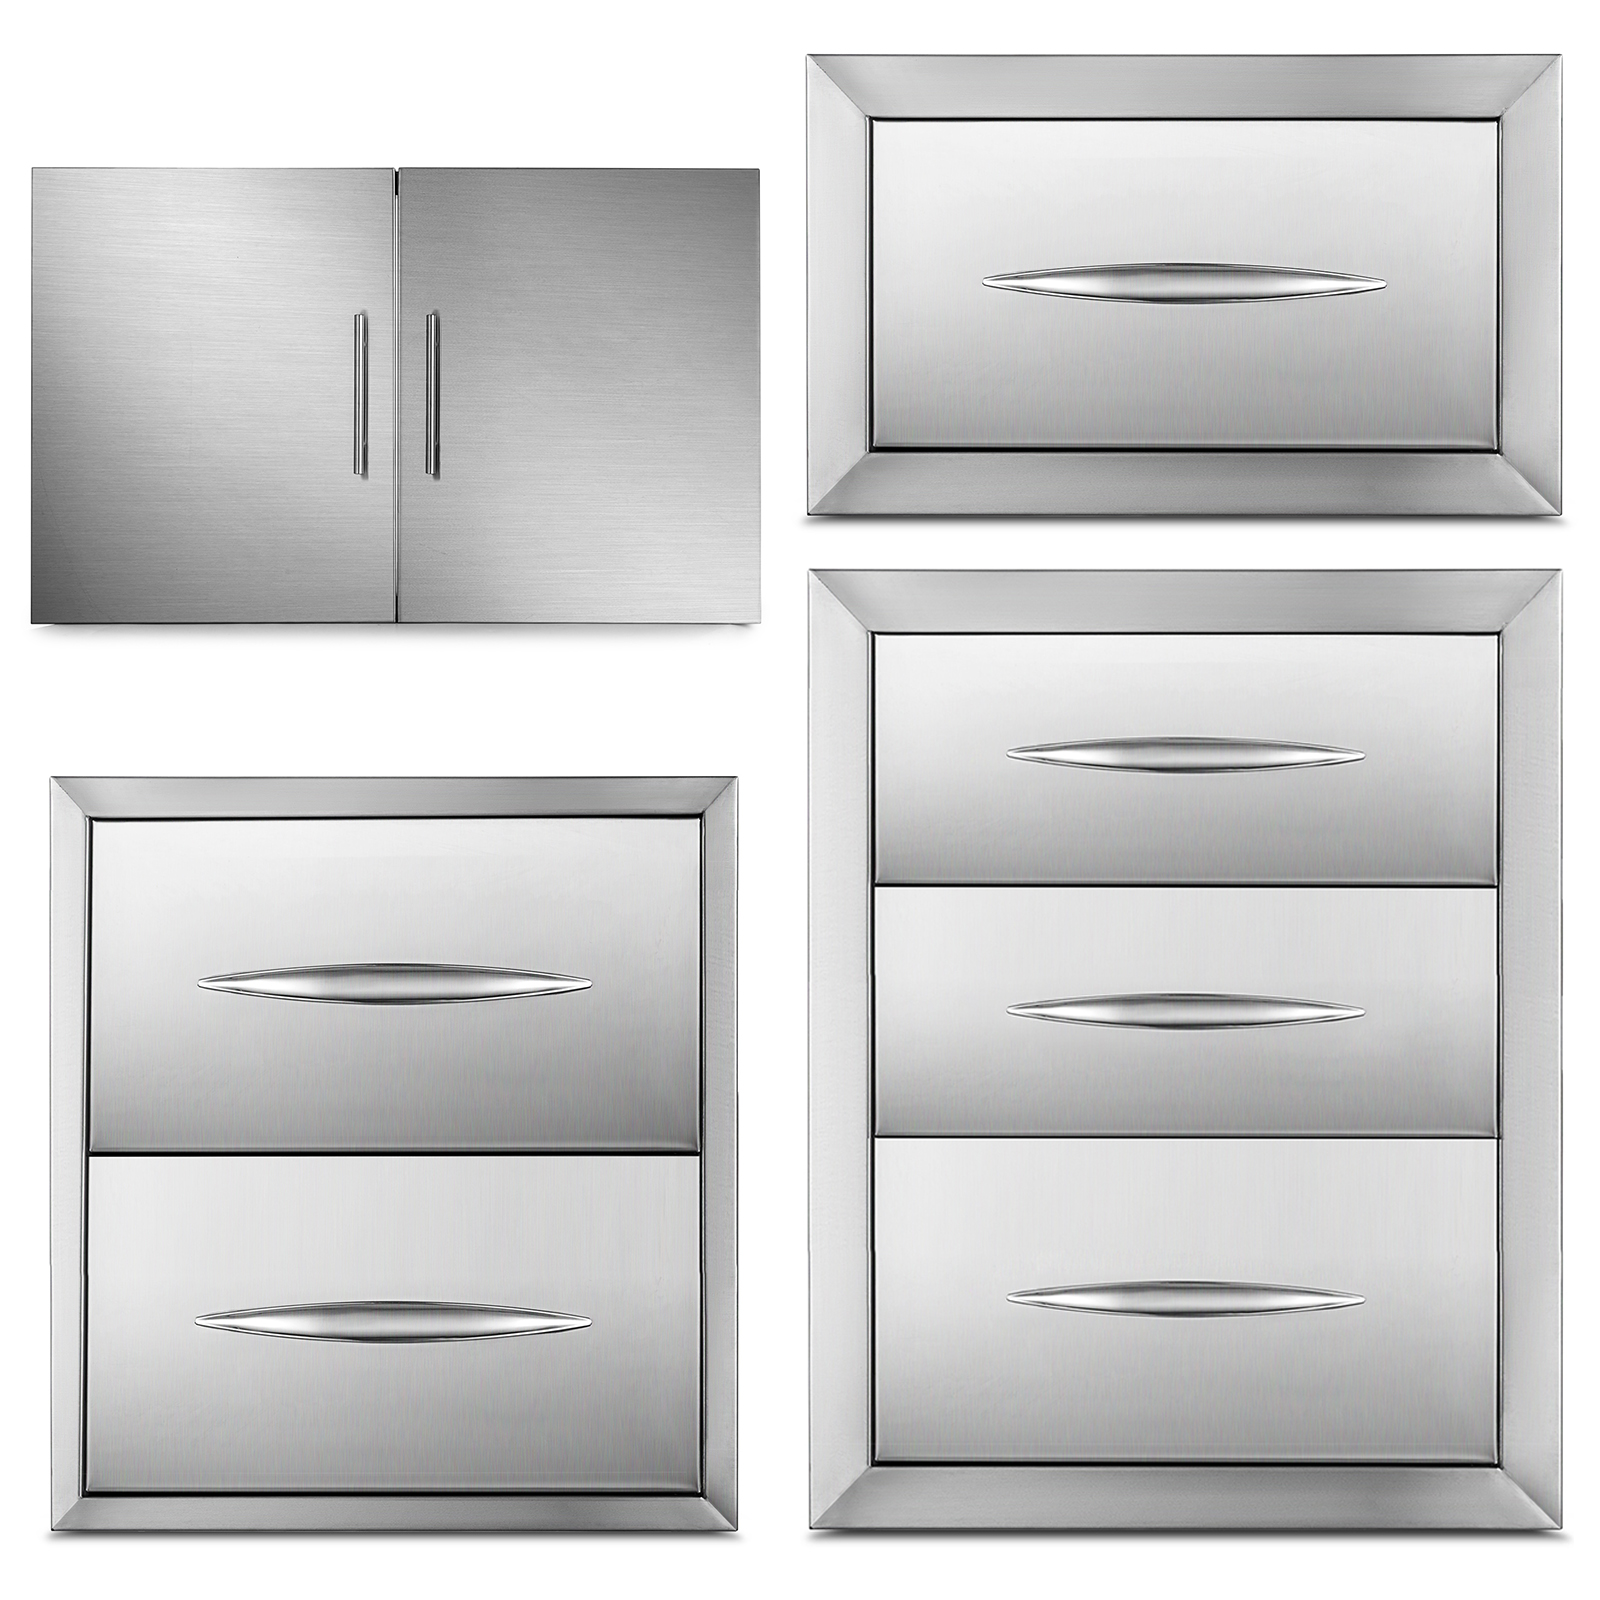 outdoor kitchen drawers,stainless steel,triple storage space